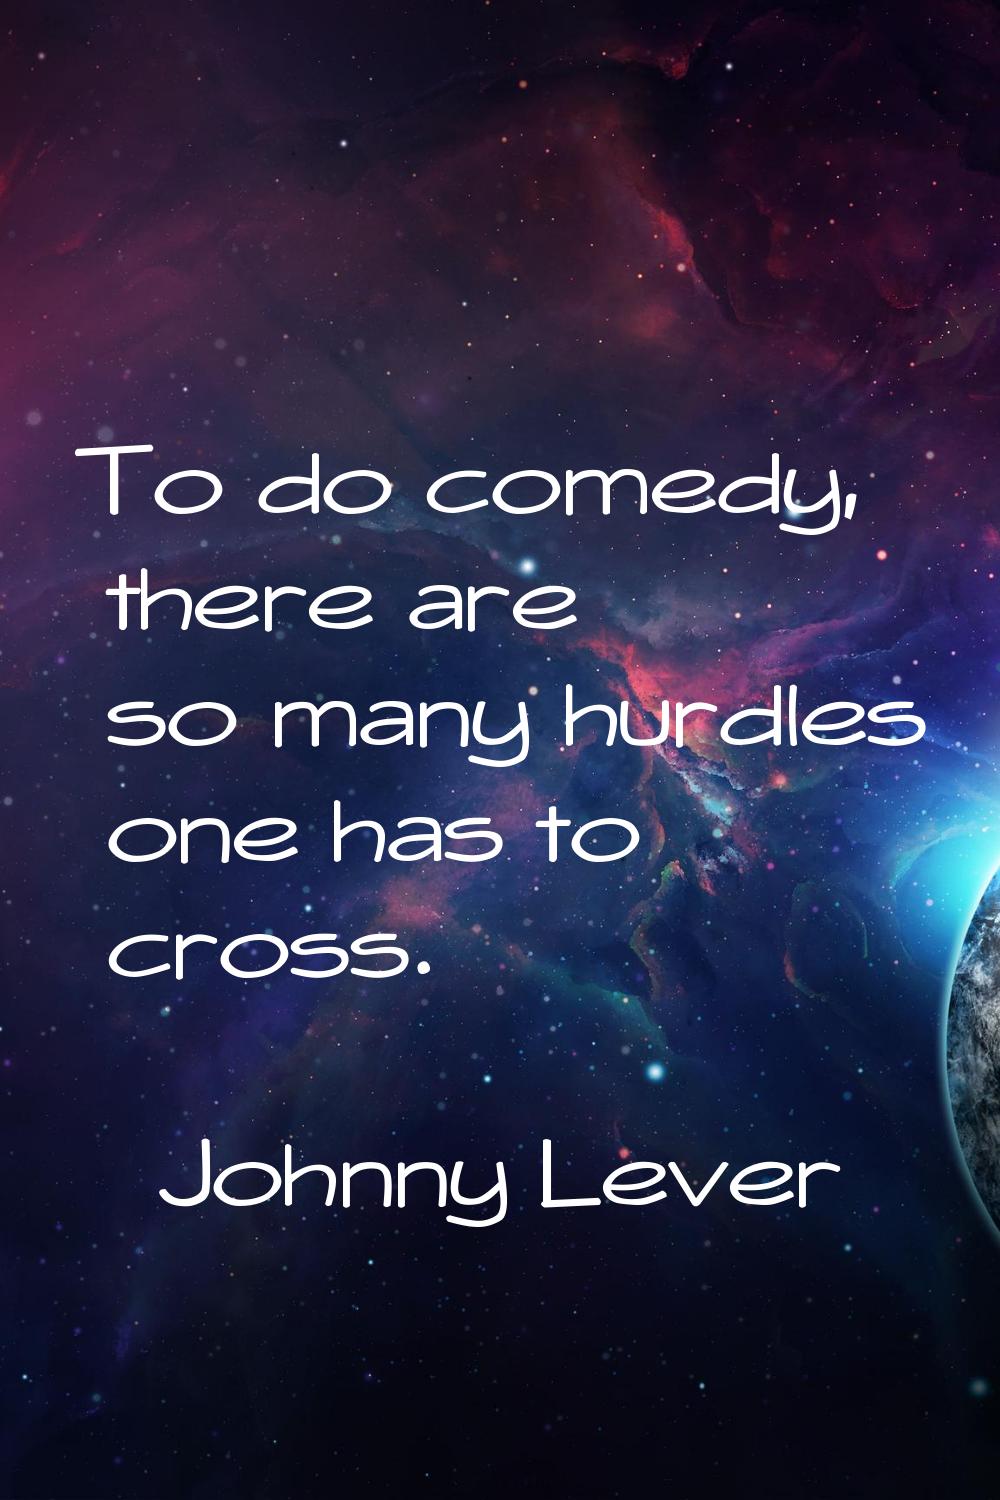 To do comedy, there are so many hurdles one has to cross.